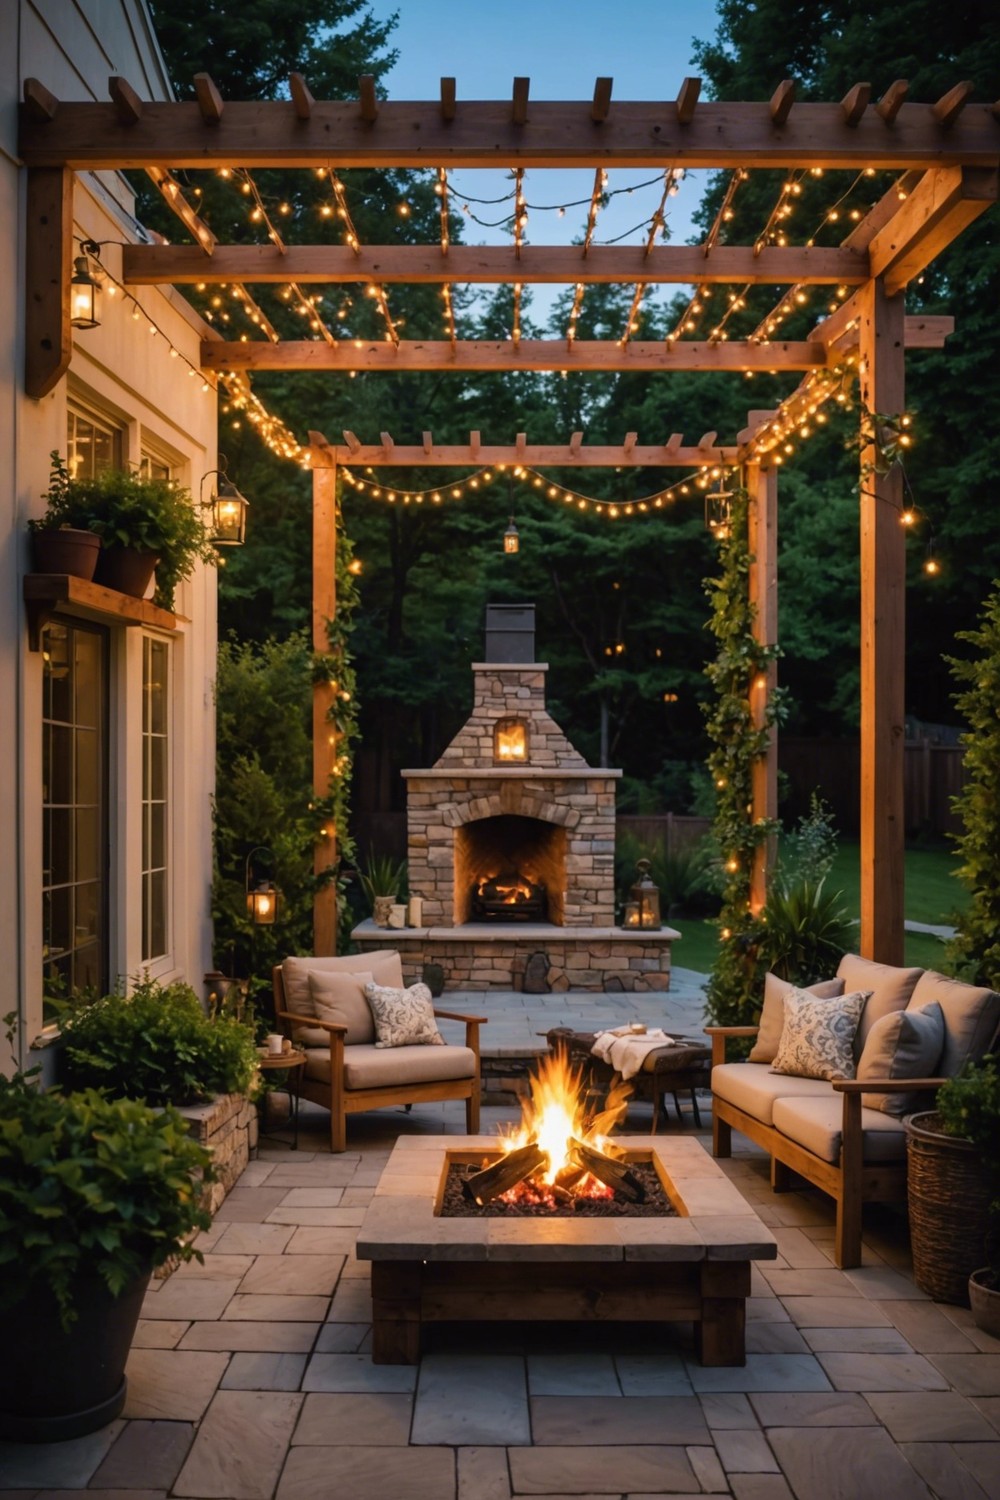 Outdoor Fireplace with Pergola and String Lights